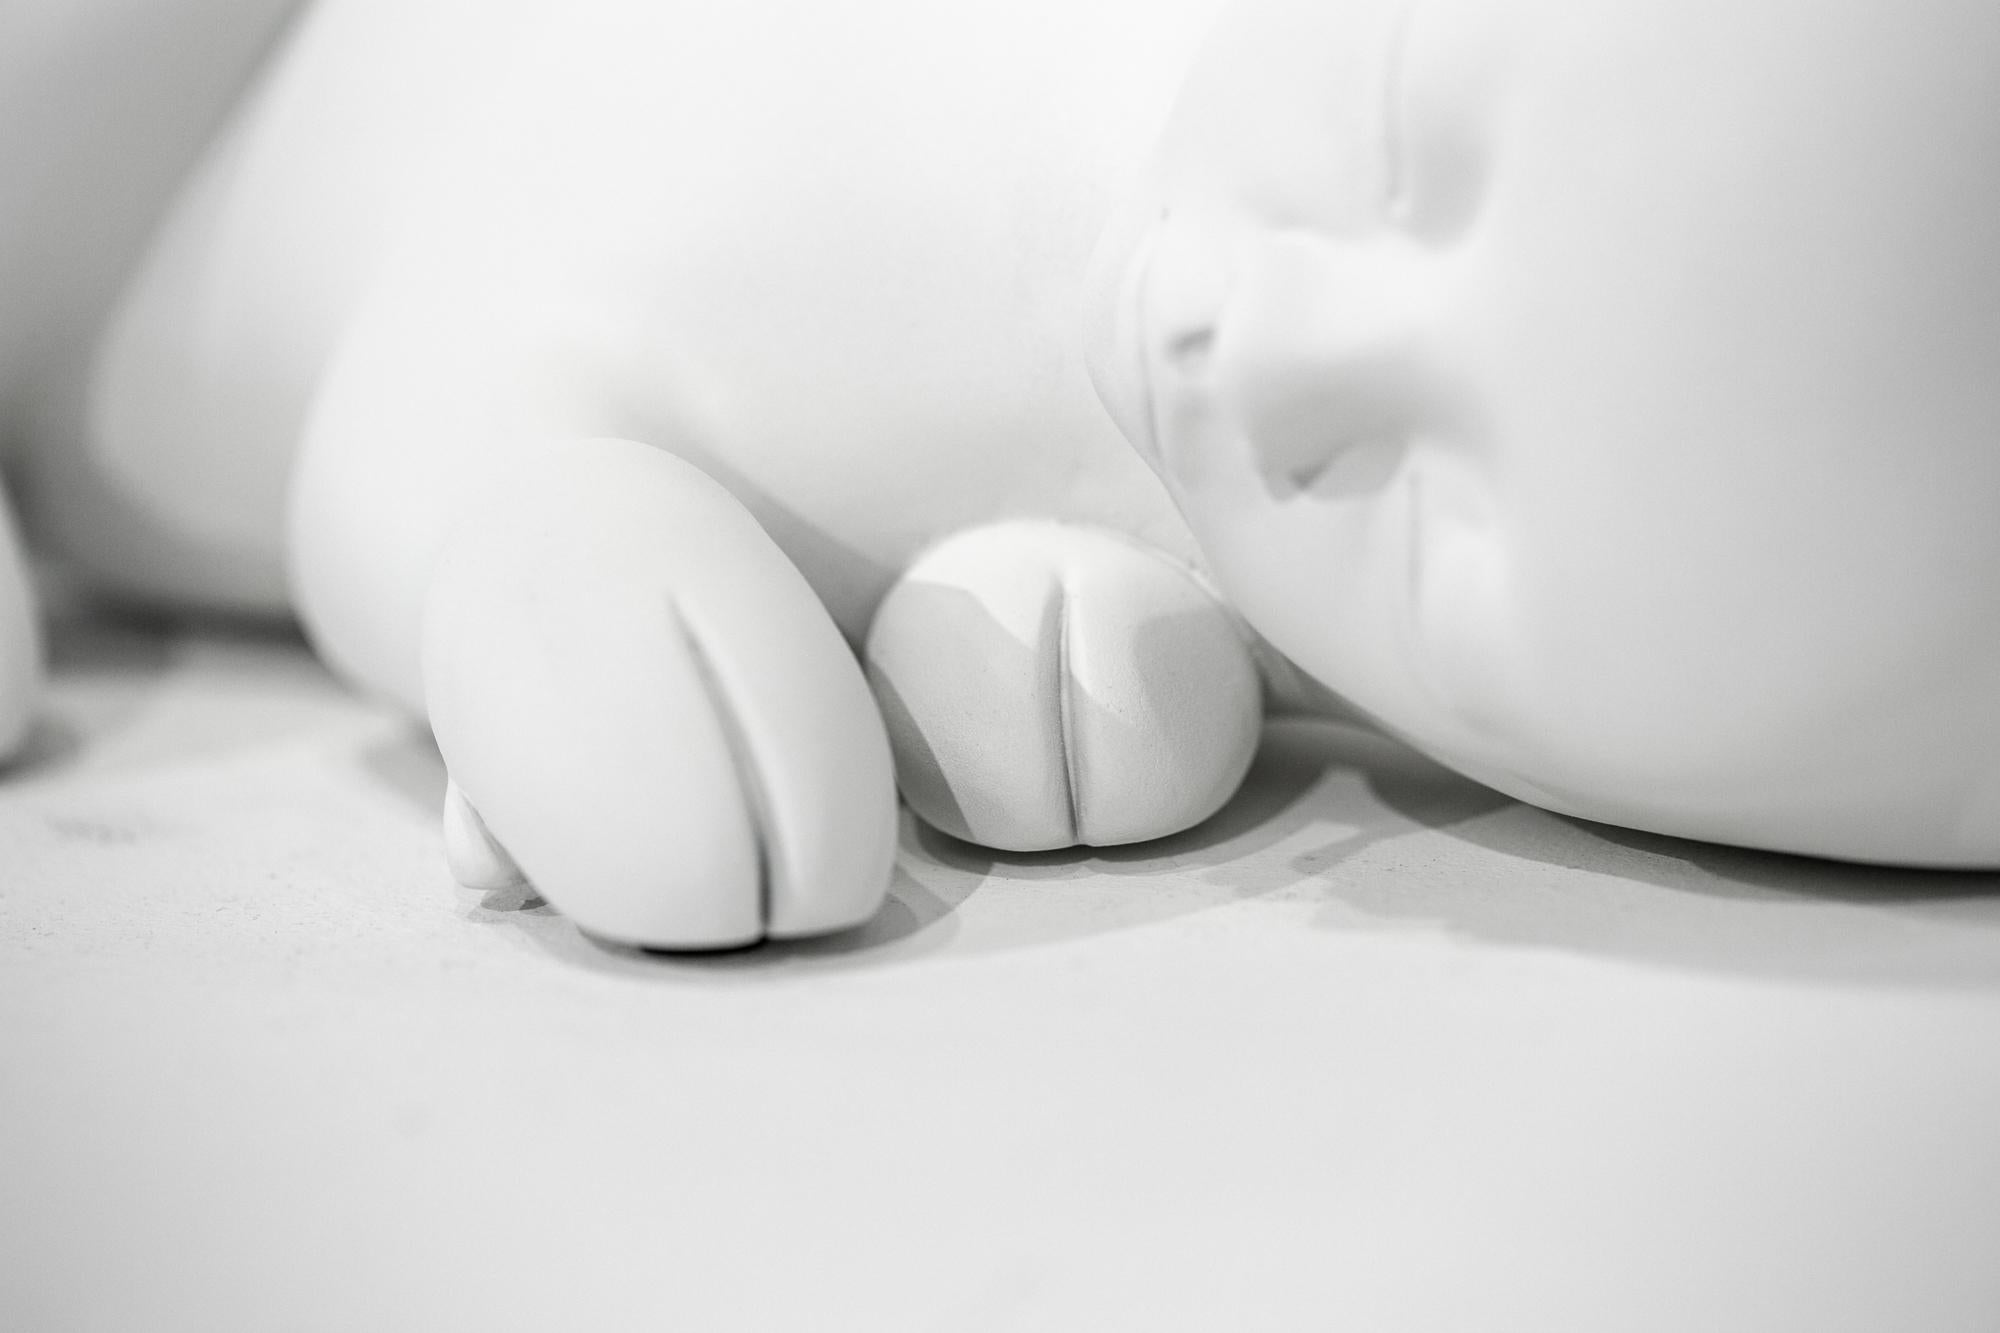 This white figurative sculpture titled 